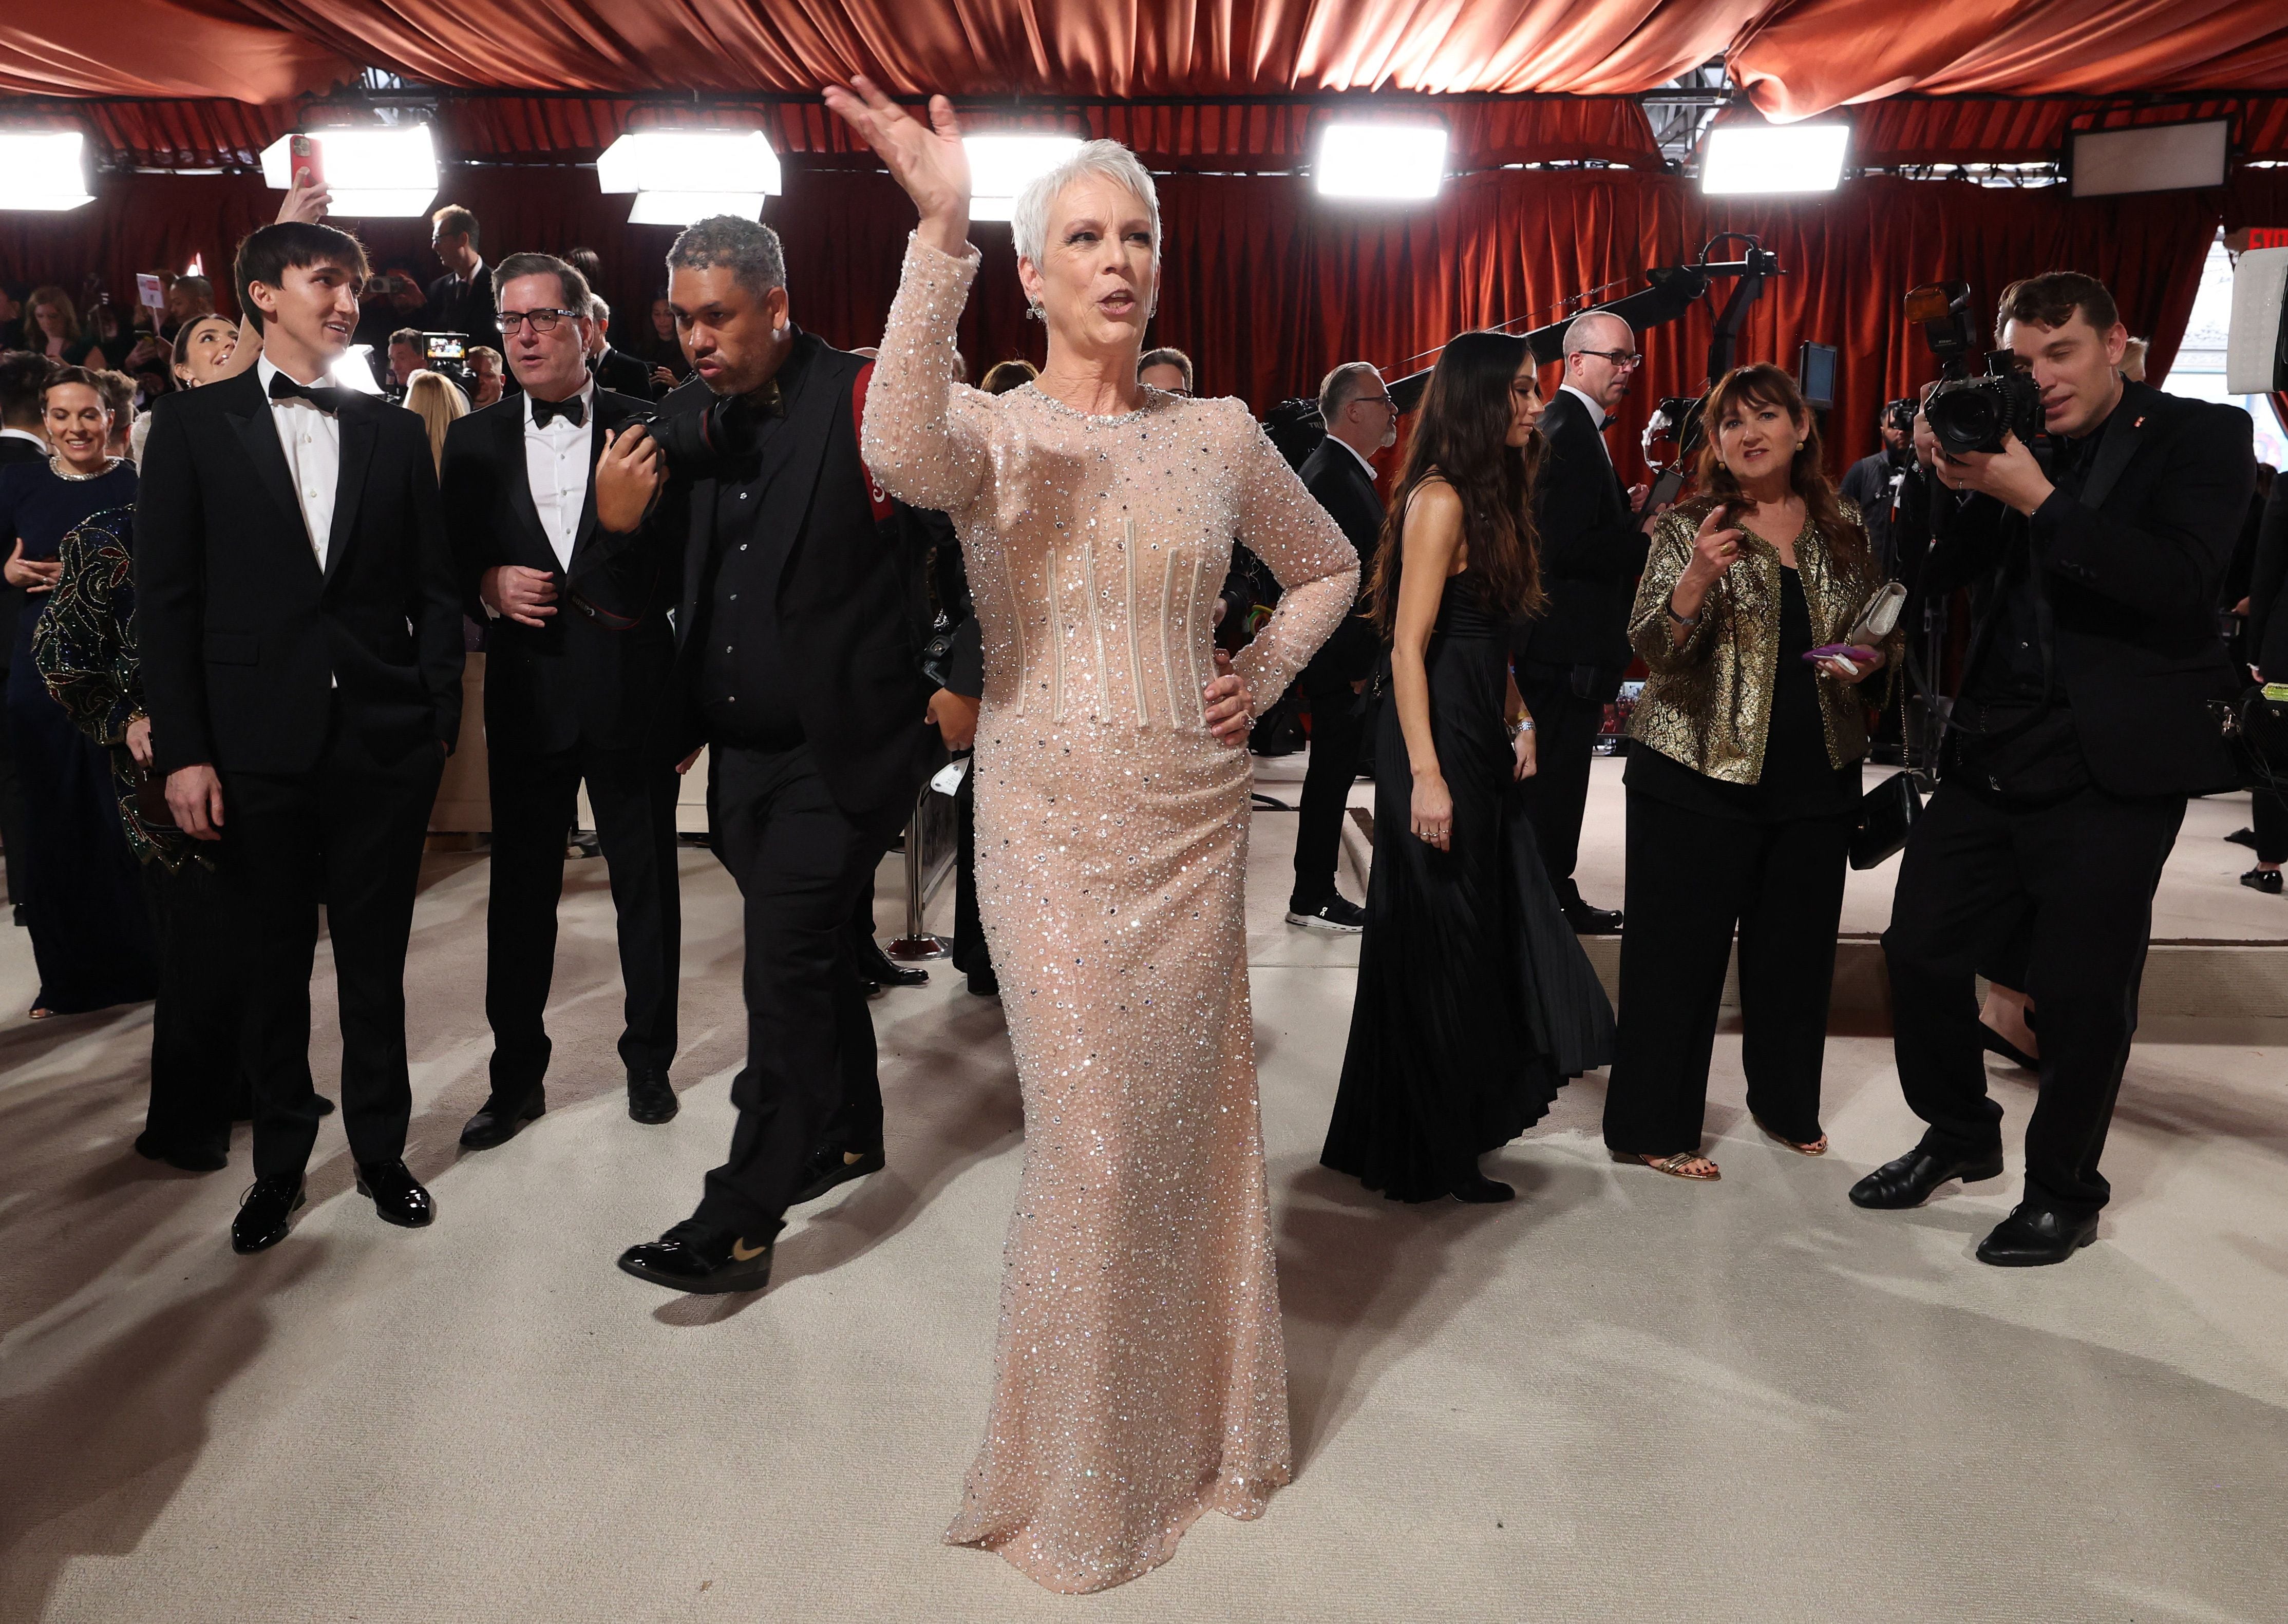 Jamie Lee Curtis poses on the champagne-colored red carpet during the Oscars arrivals at the 95th Academy Awards in Hollywood, Los Angeles, California, U.S., March 12, 2023. REUTERS/Mario Anzuoni